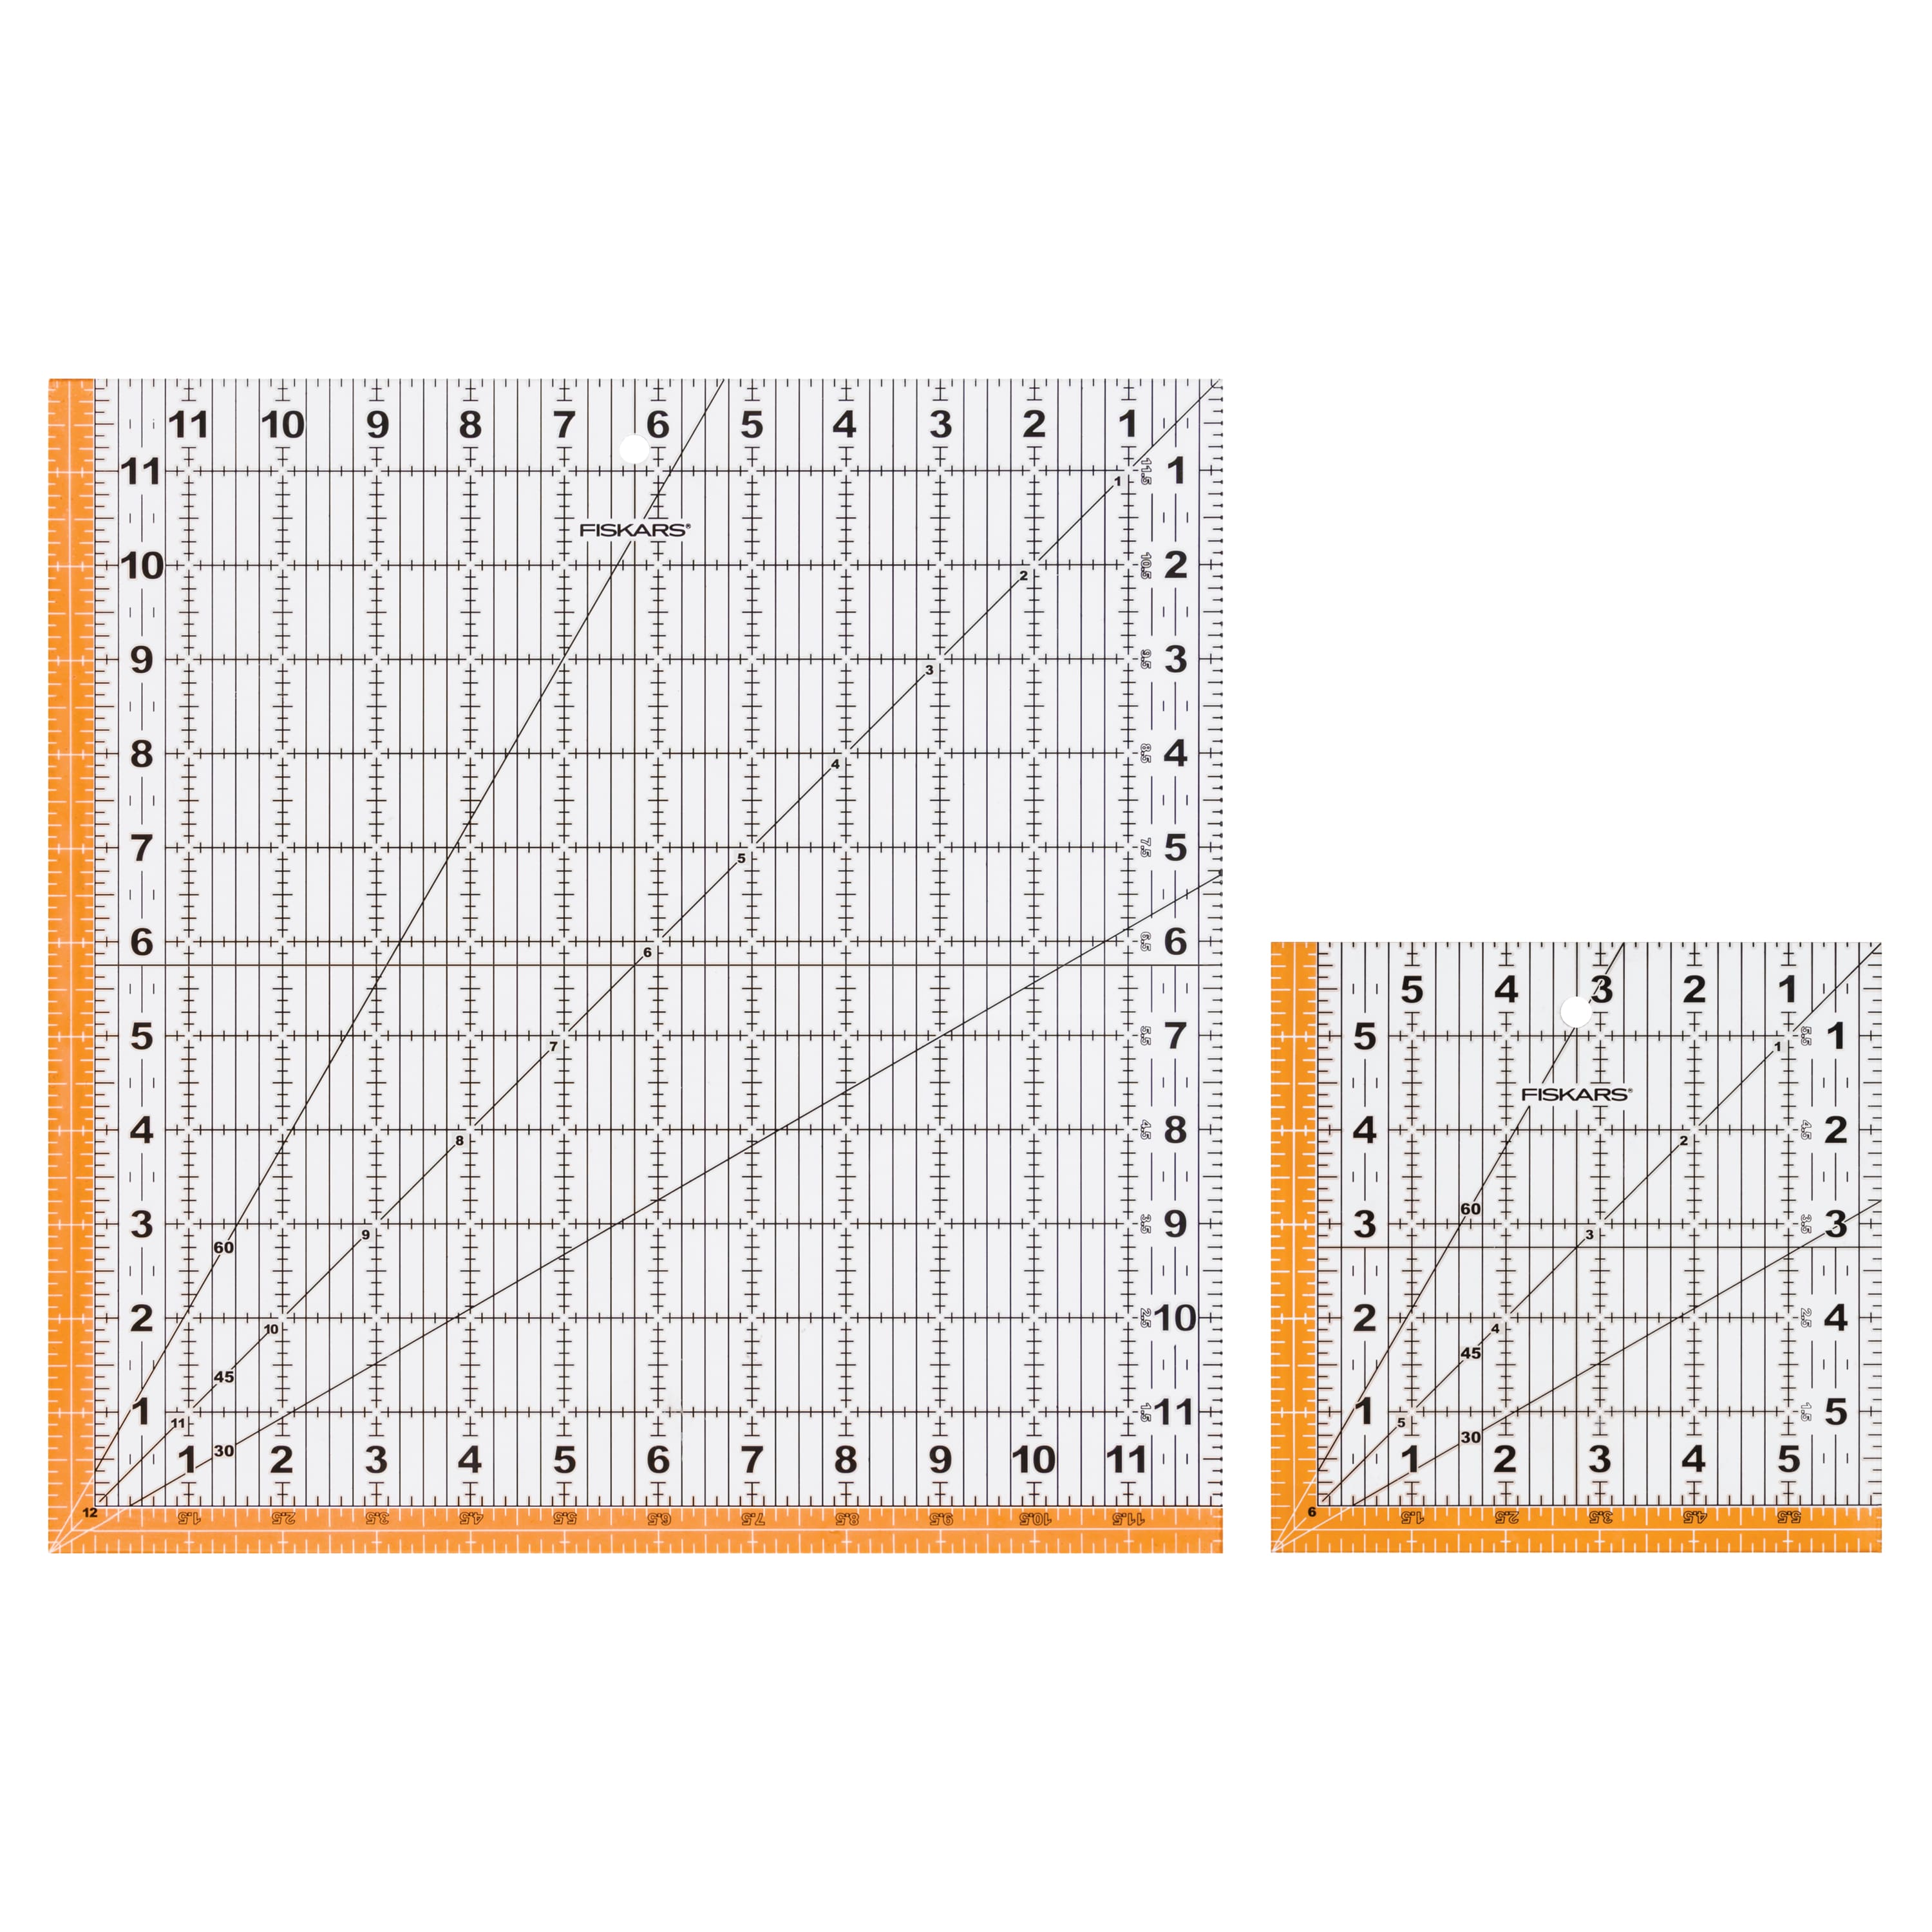 Quilting Rulers